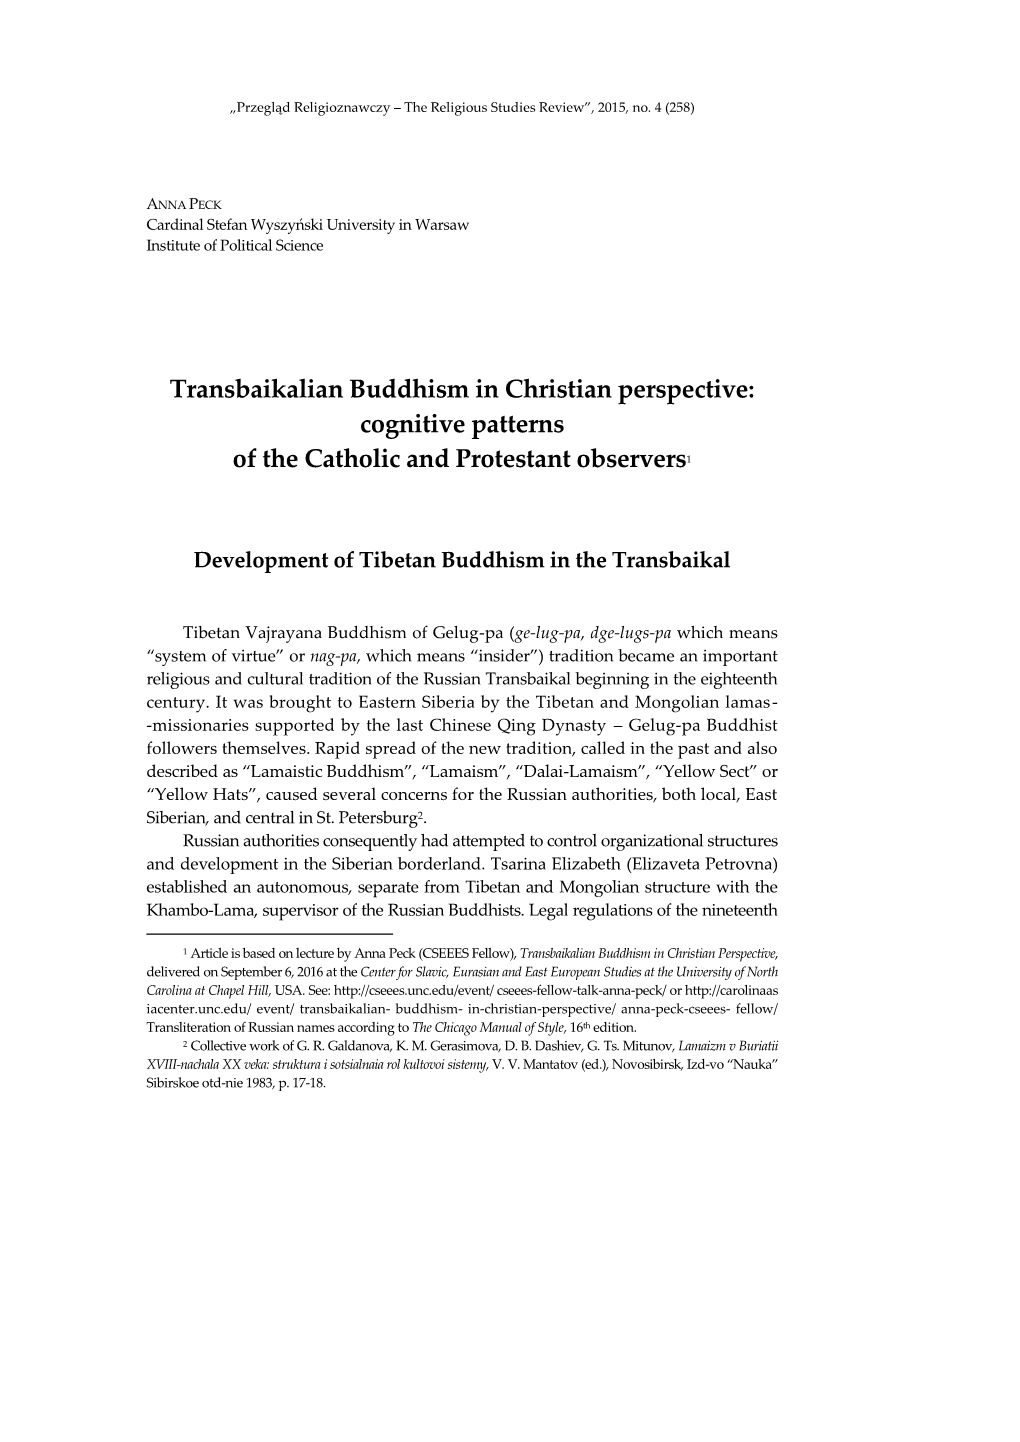 Transbaikalian Buddhism in Christian Perspective: Cognitive Patterns of the Catholic and Protestant Observers1